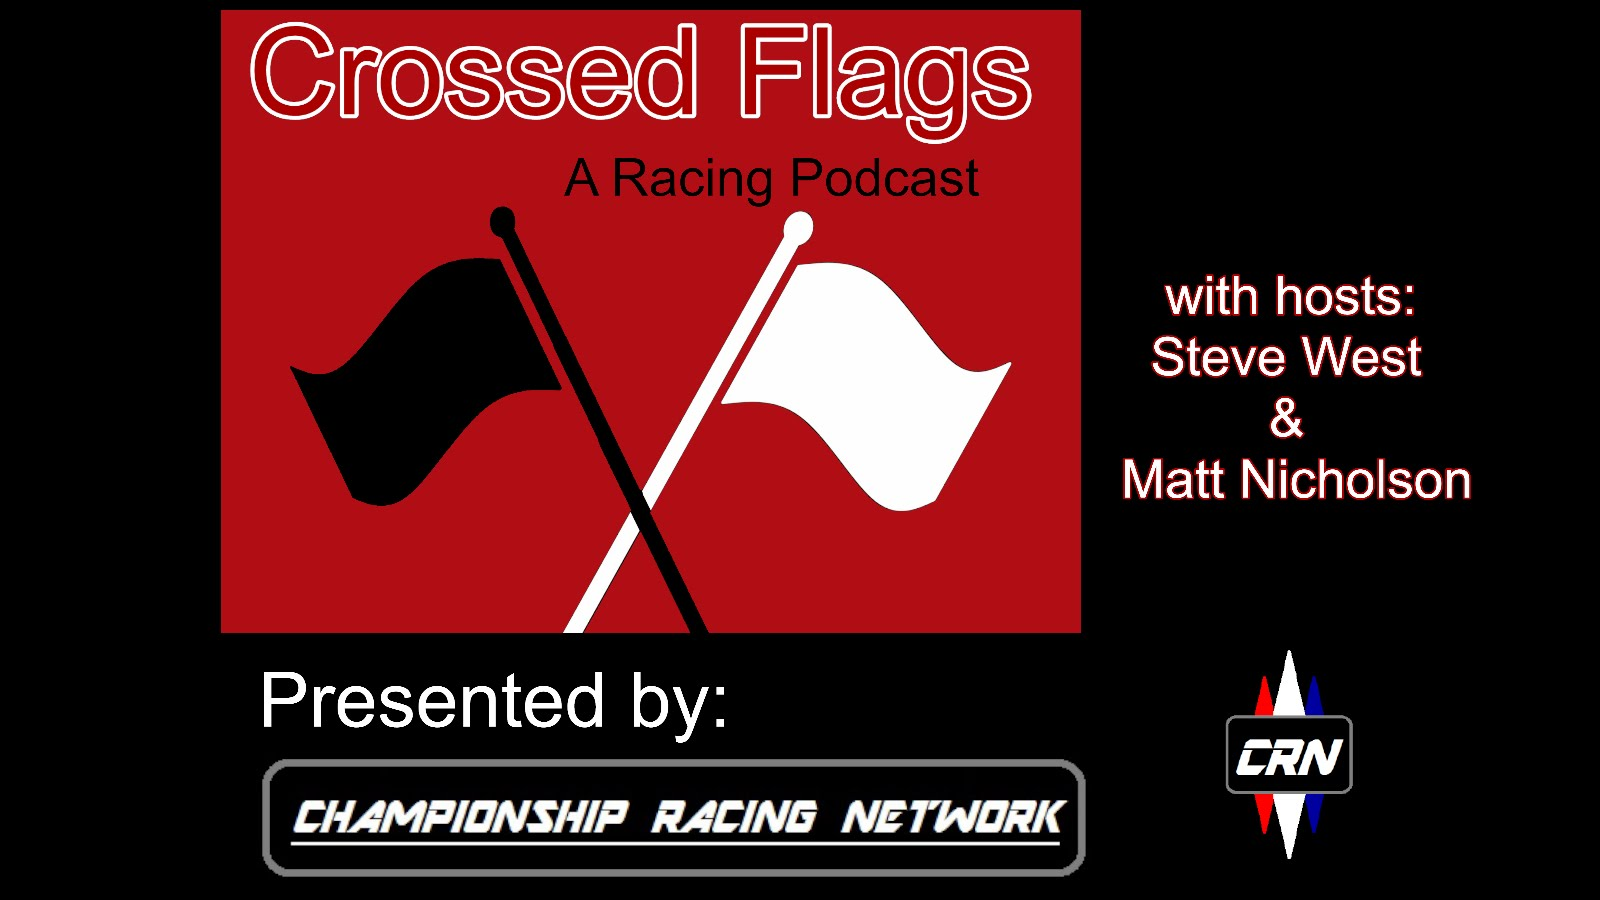 Crossed Flags Episode 4: Going over the Limits